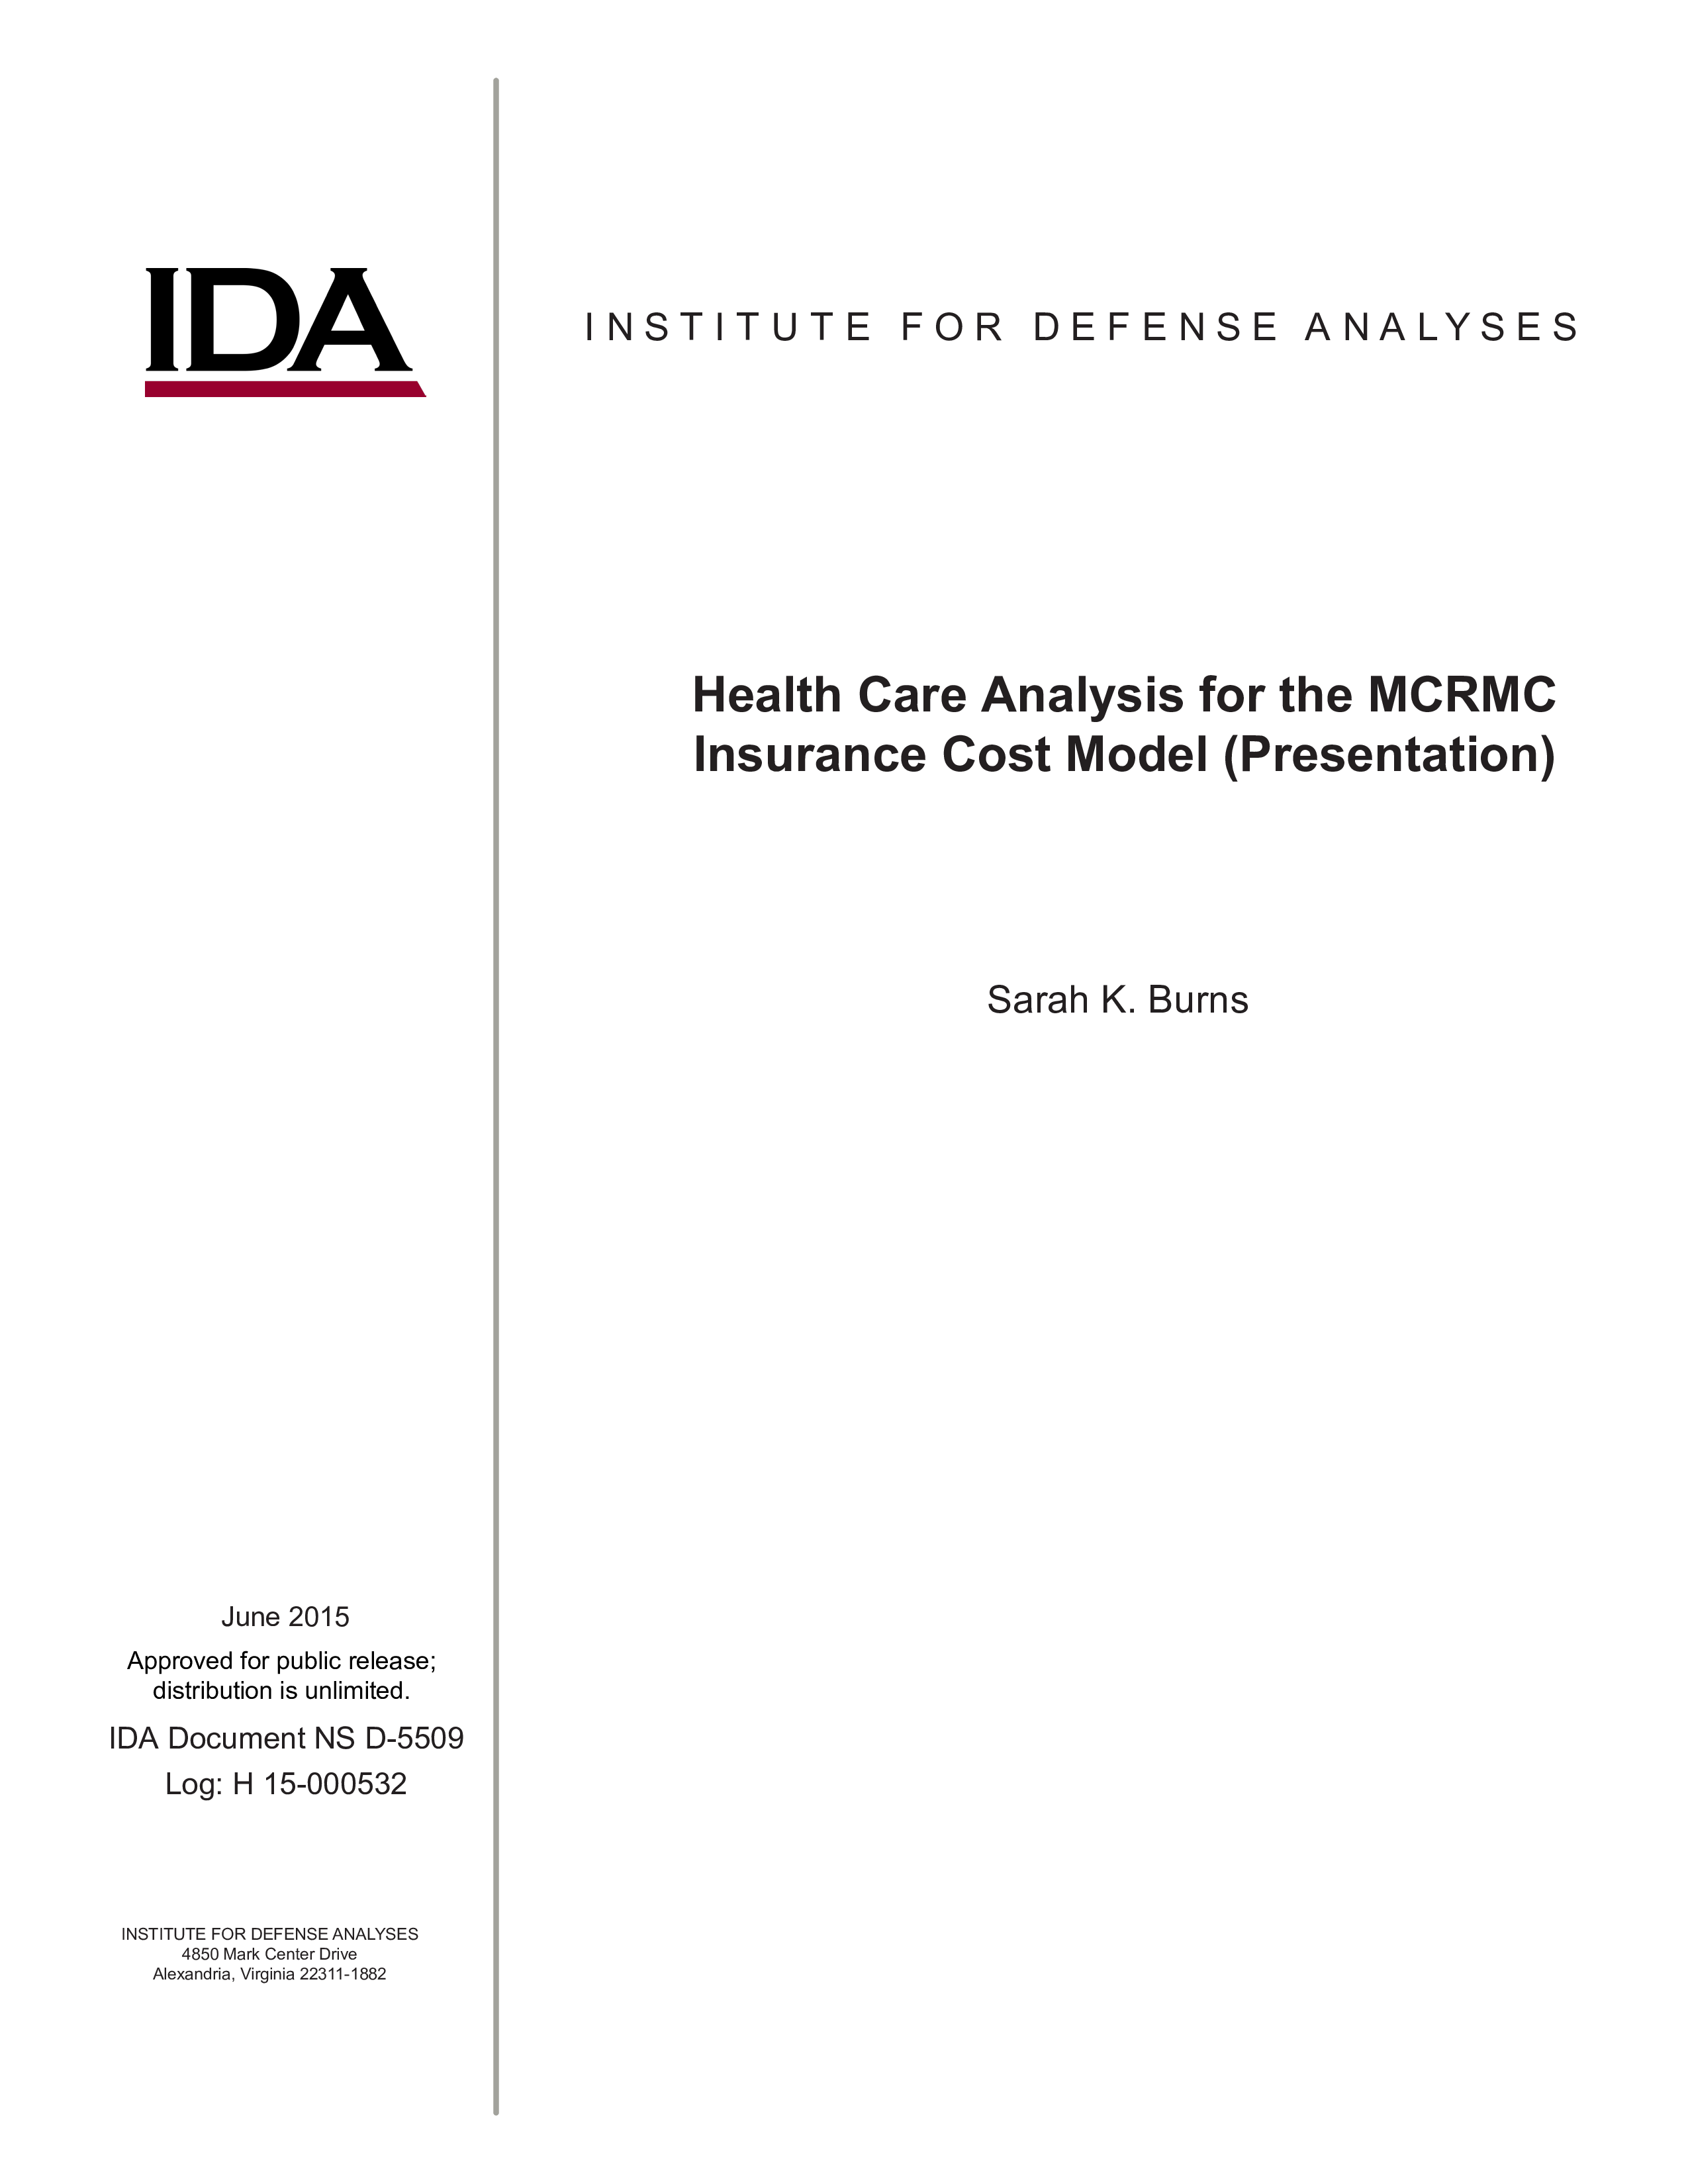 Health Care Analysis for the MCRMC Insurance Cost Model (Presentation)